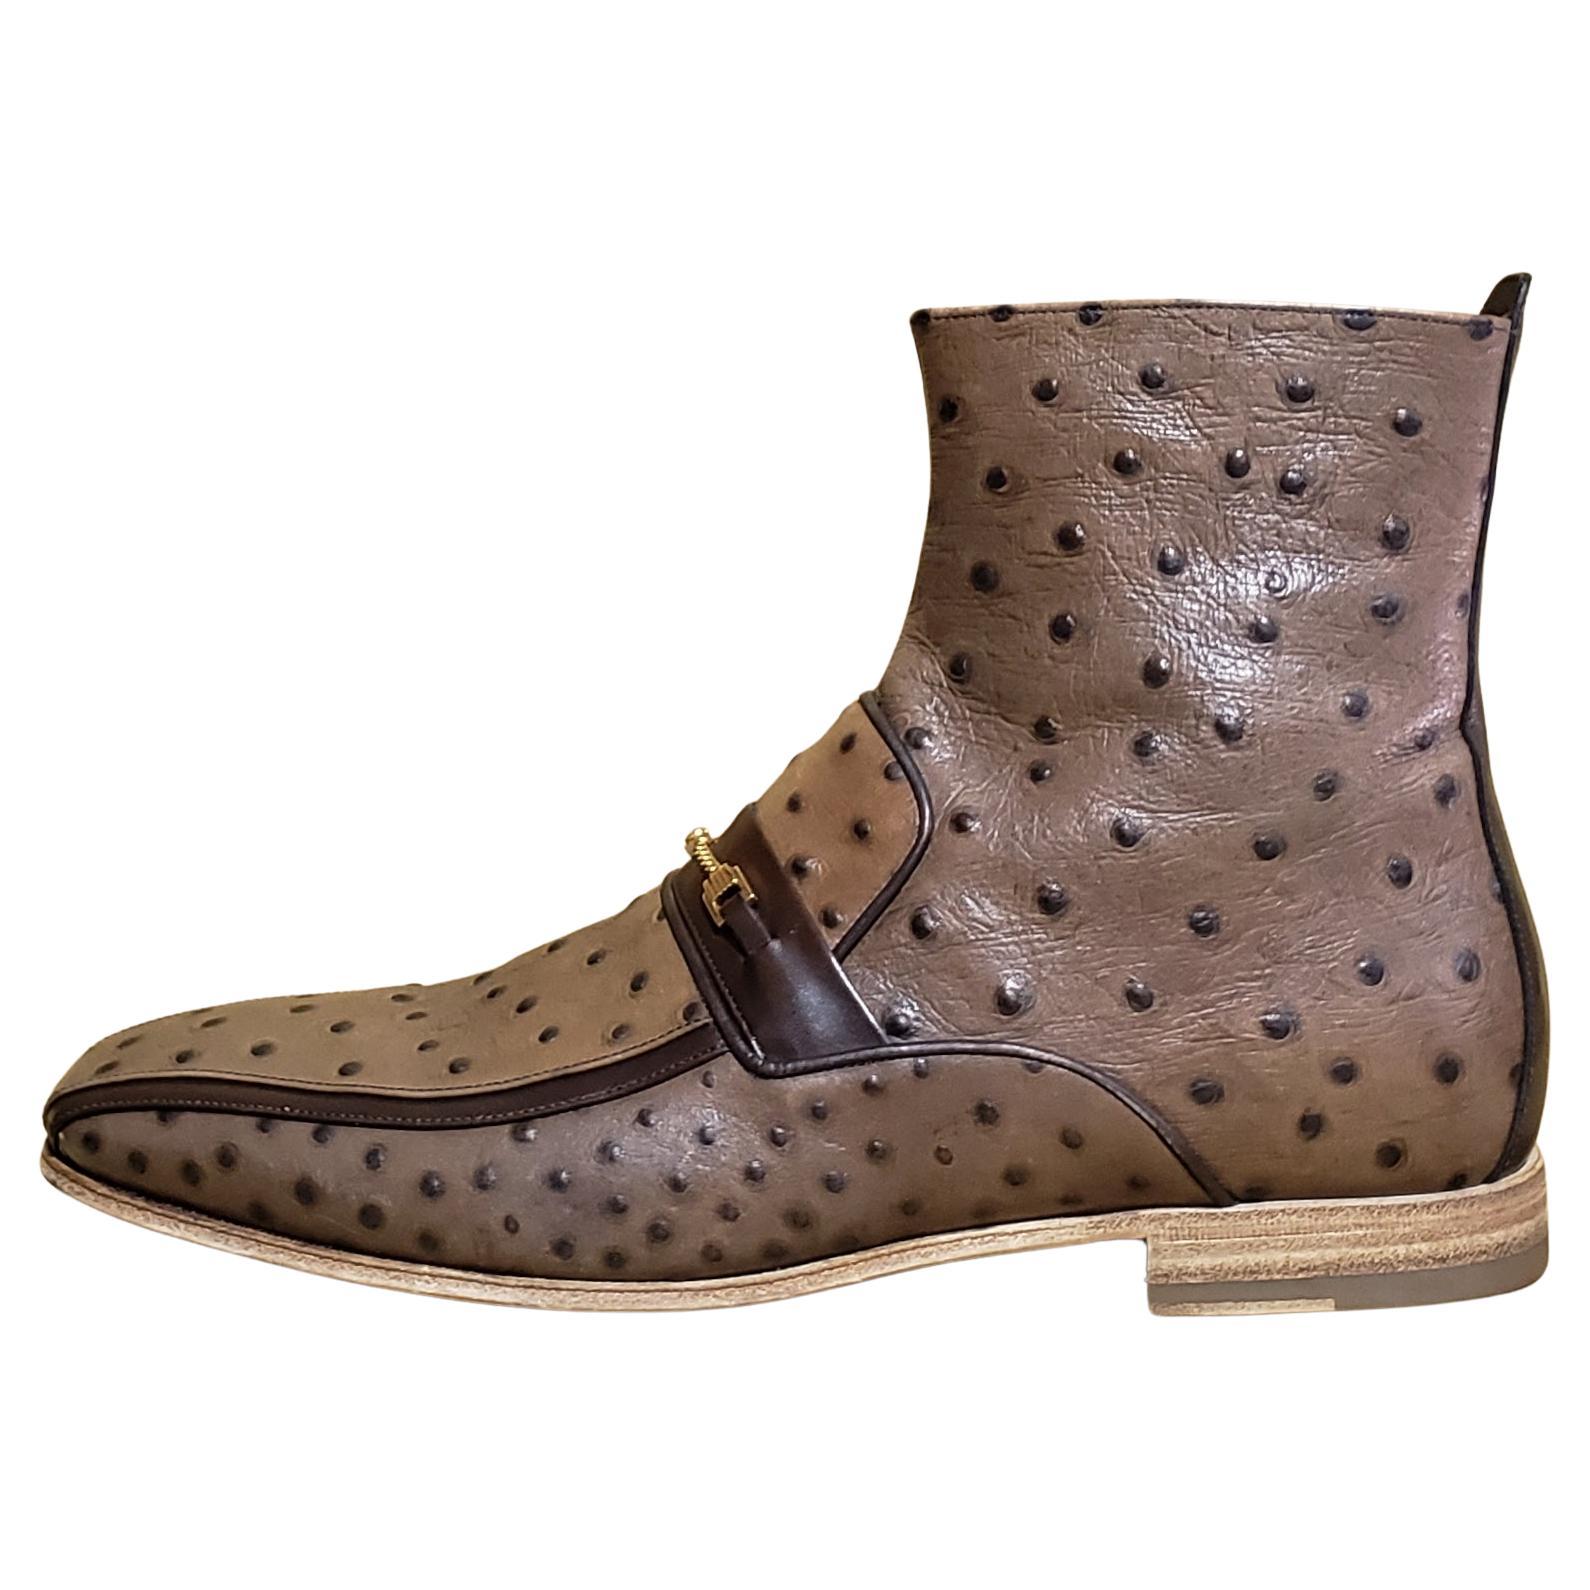 F/W2015 look#33 NEW VERSACE BROWN OSTRICH LEATHER BOOTS with SIDE ZIPPER 44 - 11 For Sale